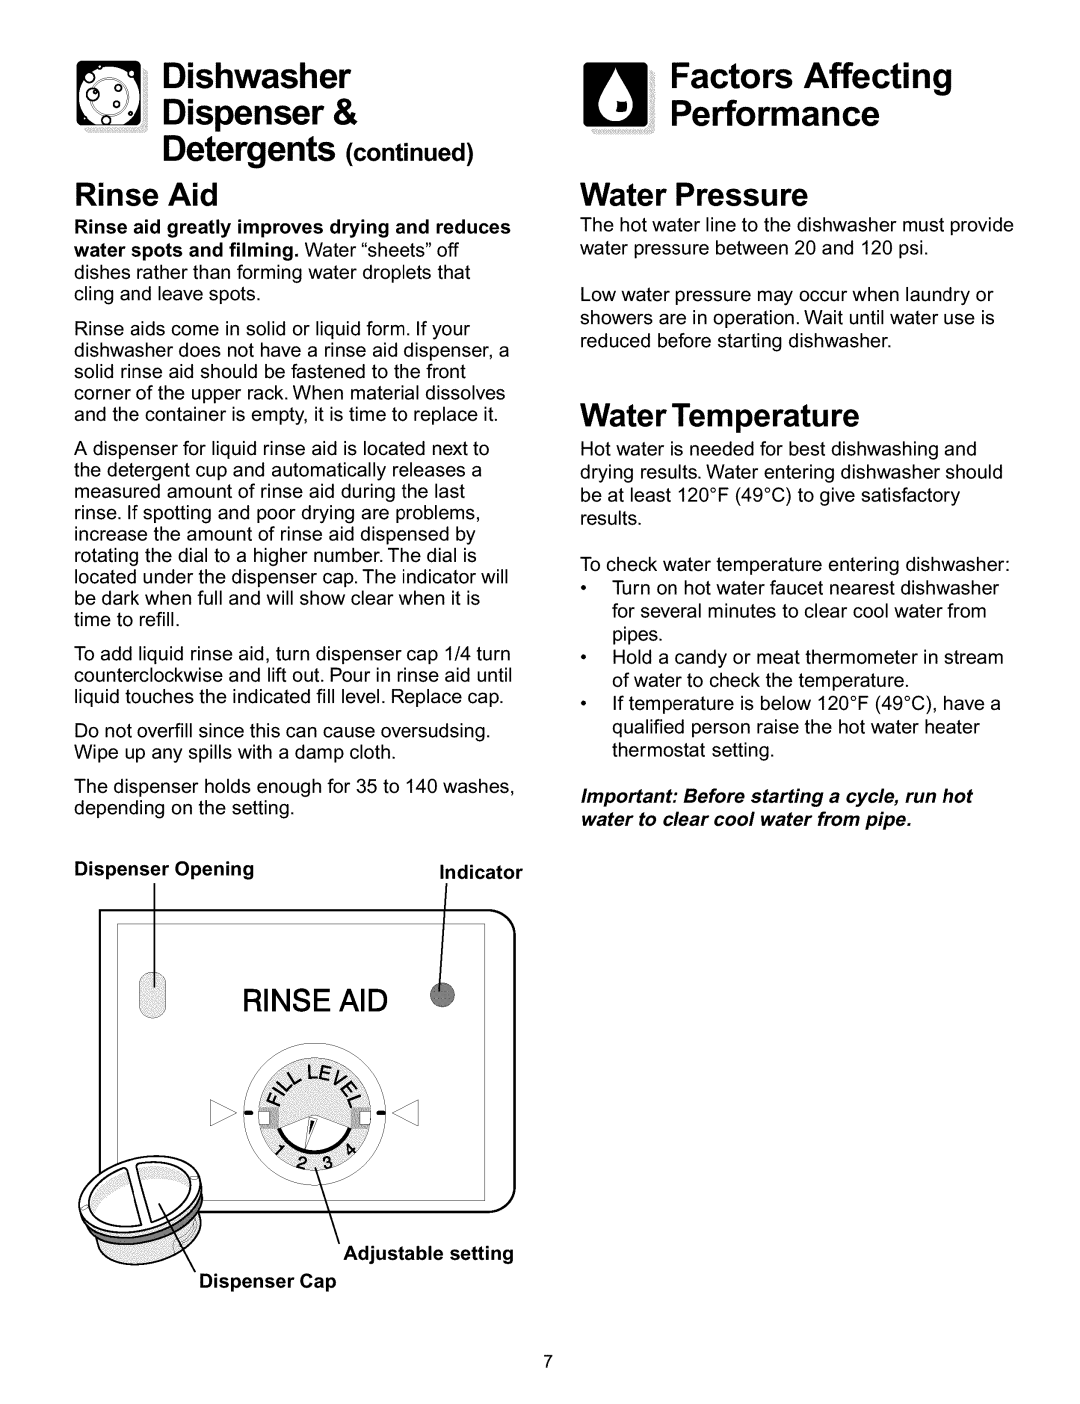 Frigidaire 154428101 Dishwasher Dispenser & Detergents continued, Factors Affecting Performance Water Pressure, Rinse Aid 